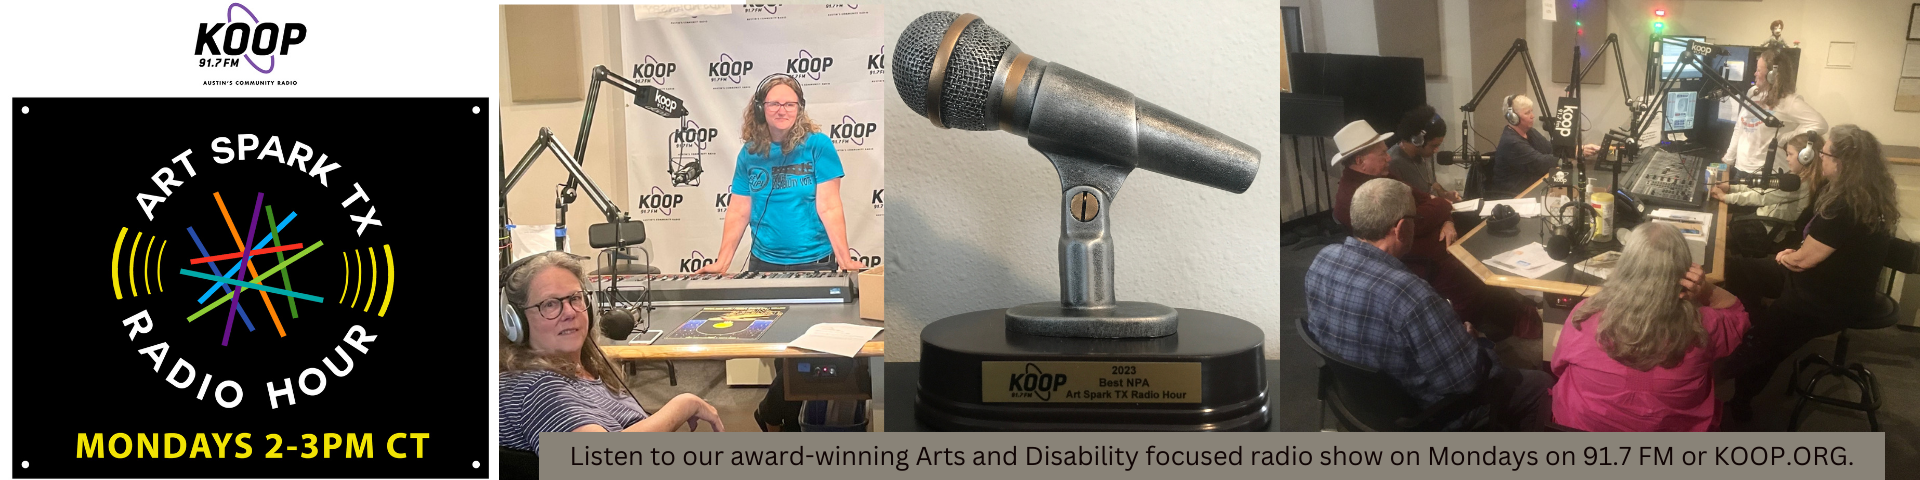 Art Spark Texas Radio Hour, Mondays from 2 PM to 3 PM CT. Listen to our award-winning Arts and Disability focused radio show on 91.7 FM or KOOP.org!